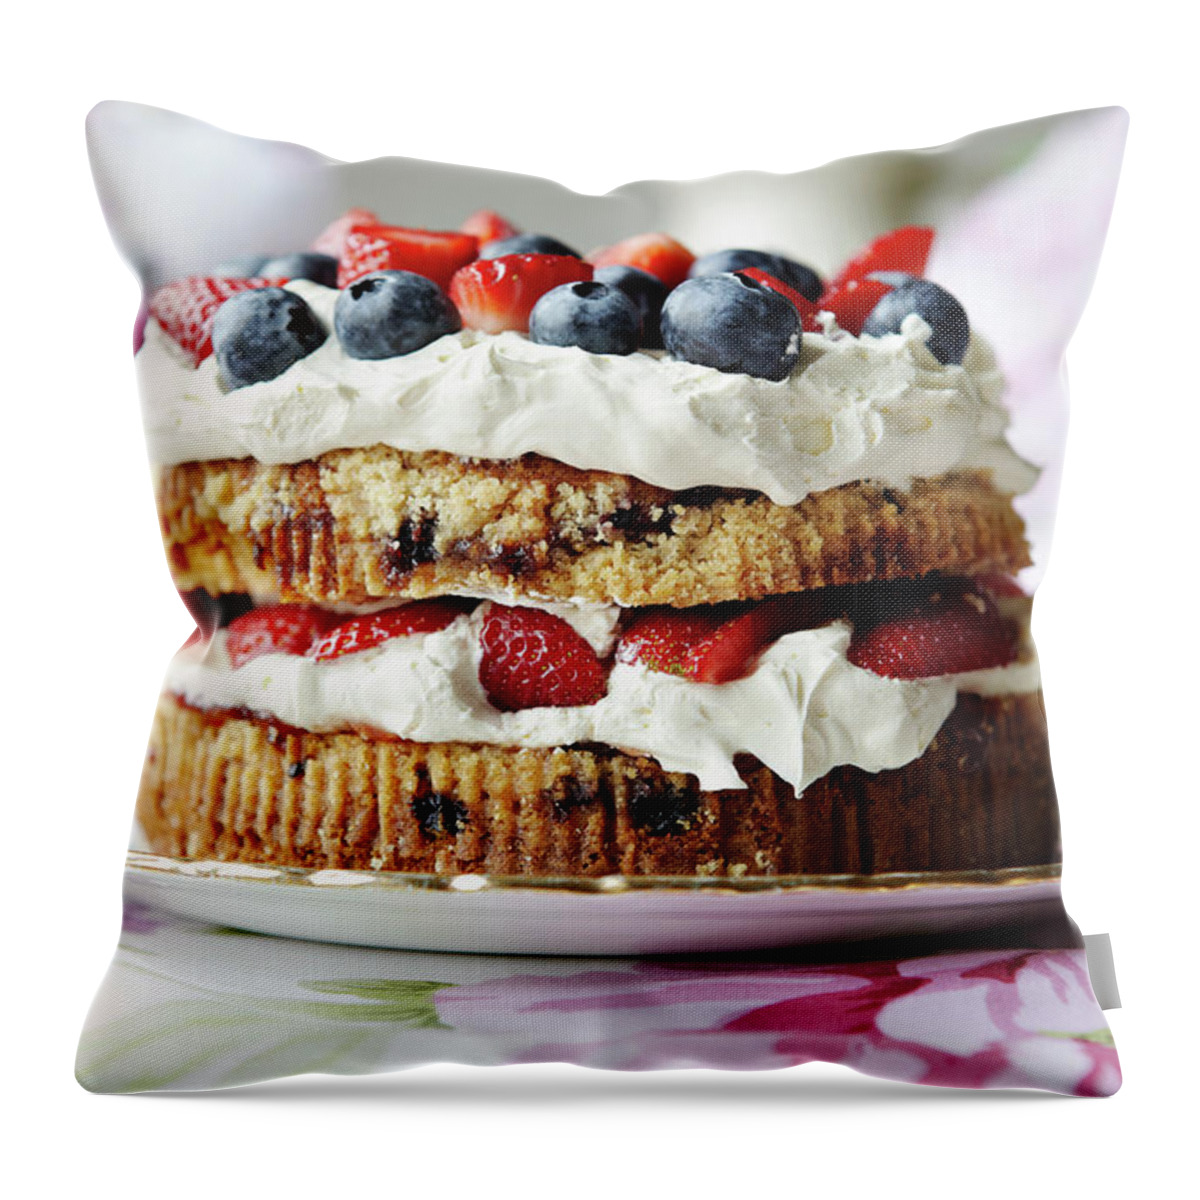 West Yorkshire Throw Pillow featuring the photograph Plate Of Fruit And Cream Cake #1 by Debby Lewis-harrison